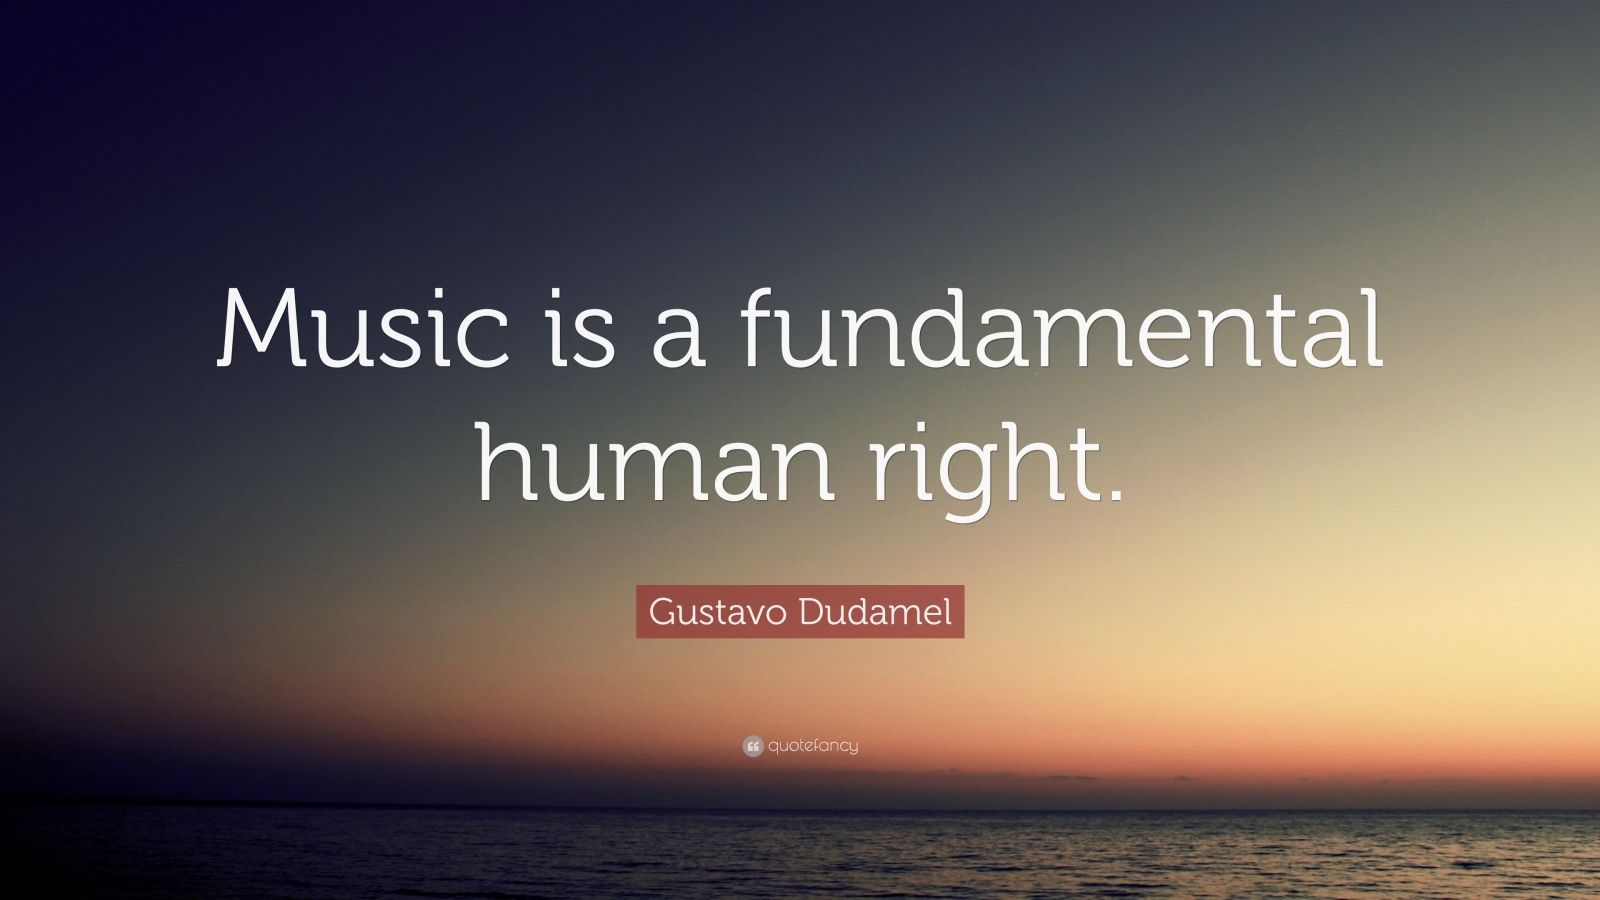 Gustavo Dudamel Quote: "Music is a fundamental human right ...